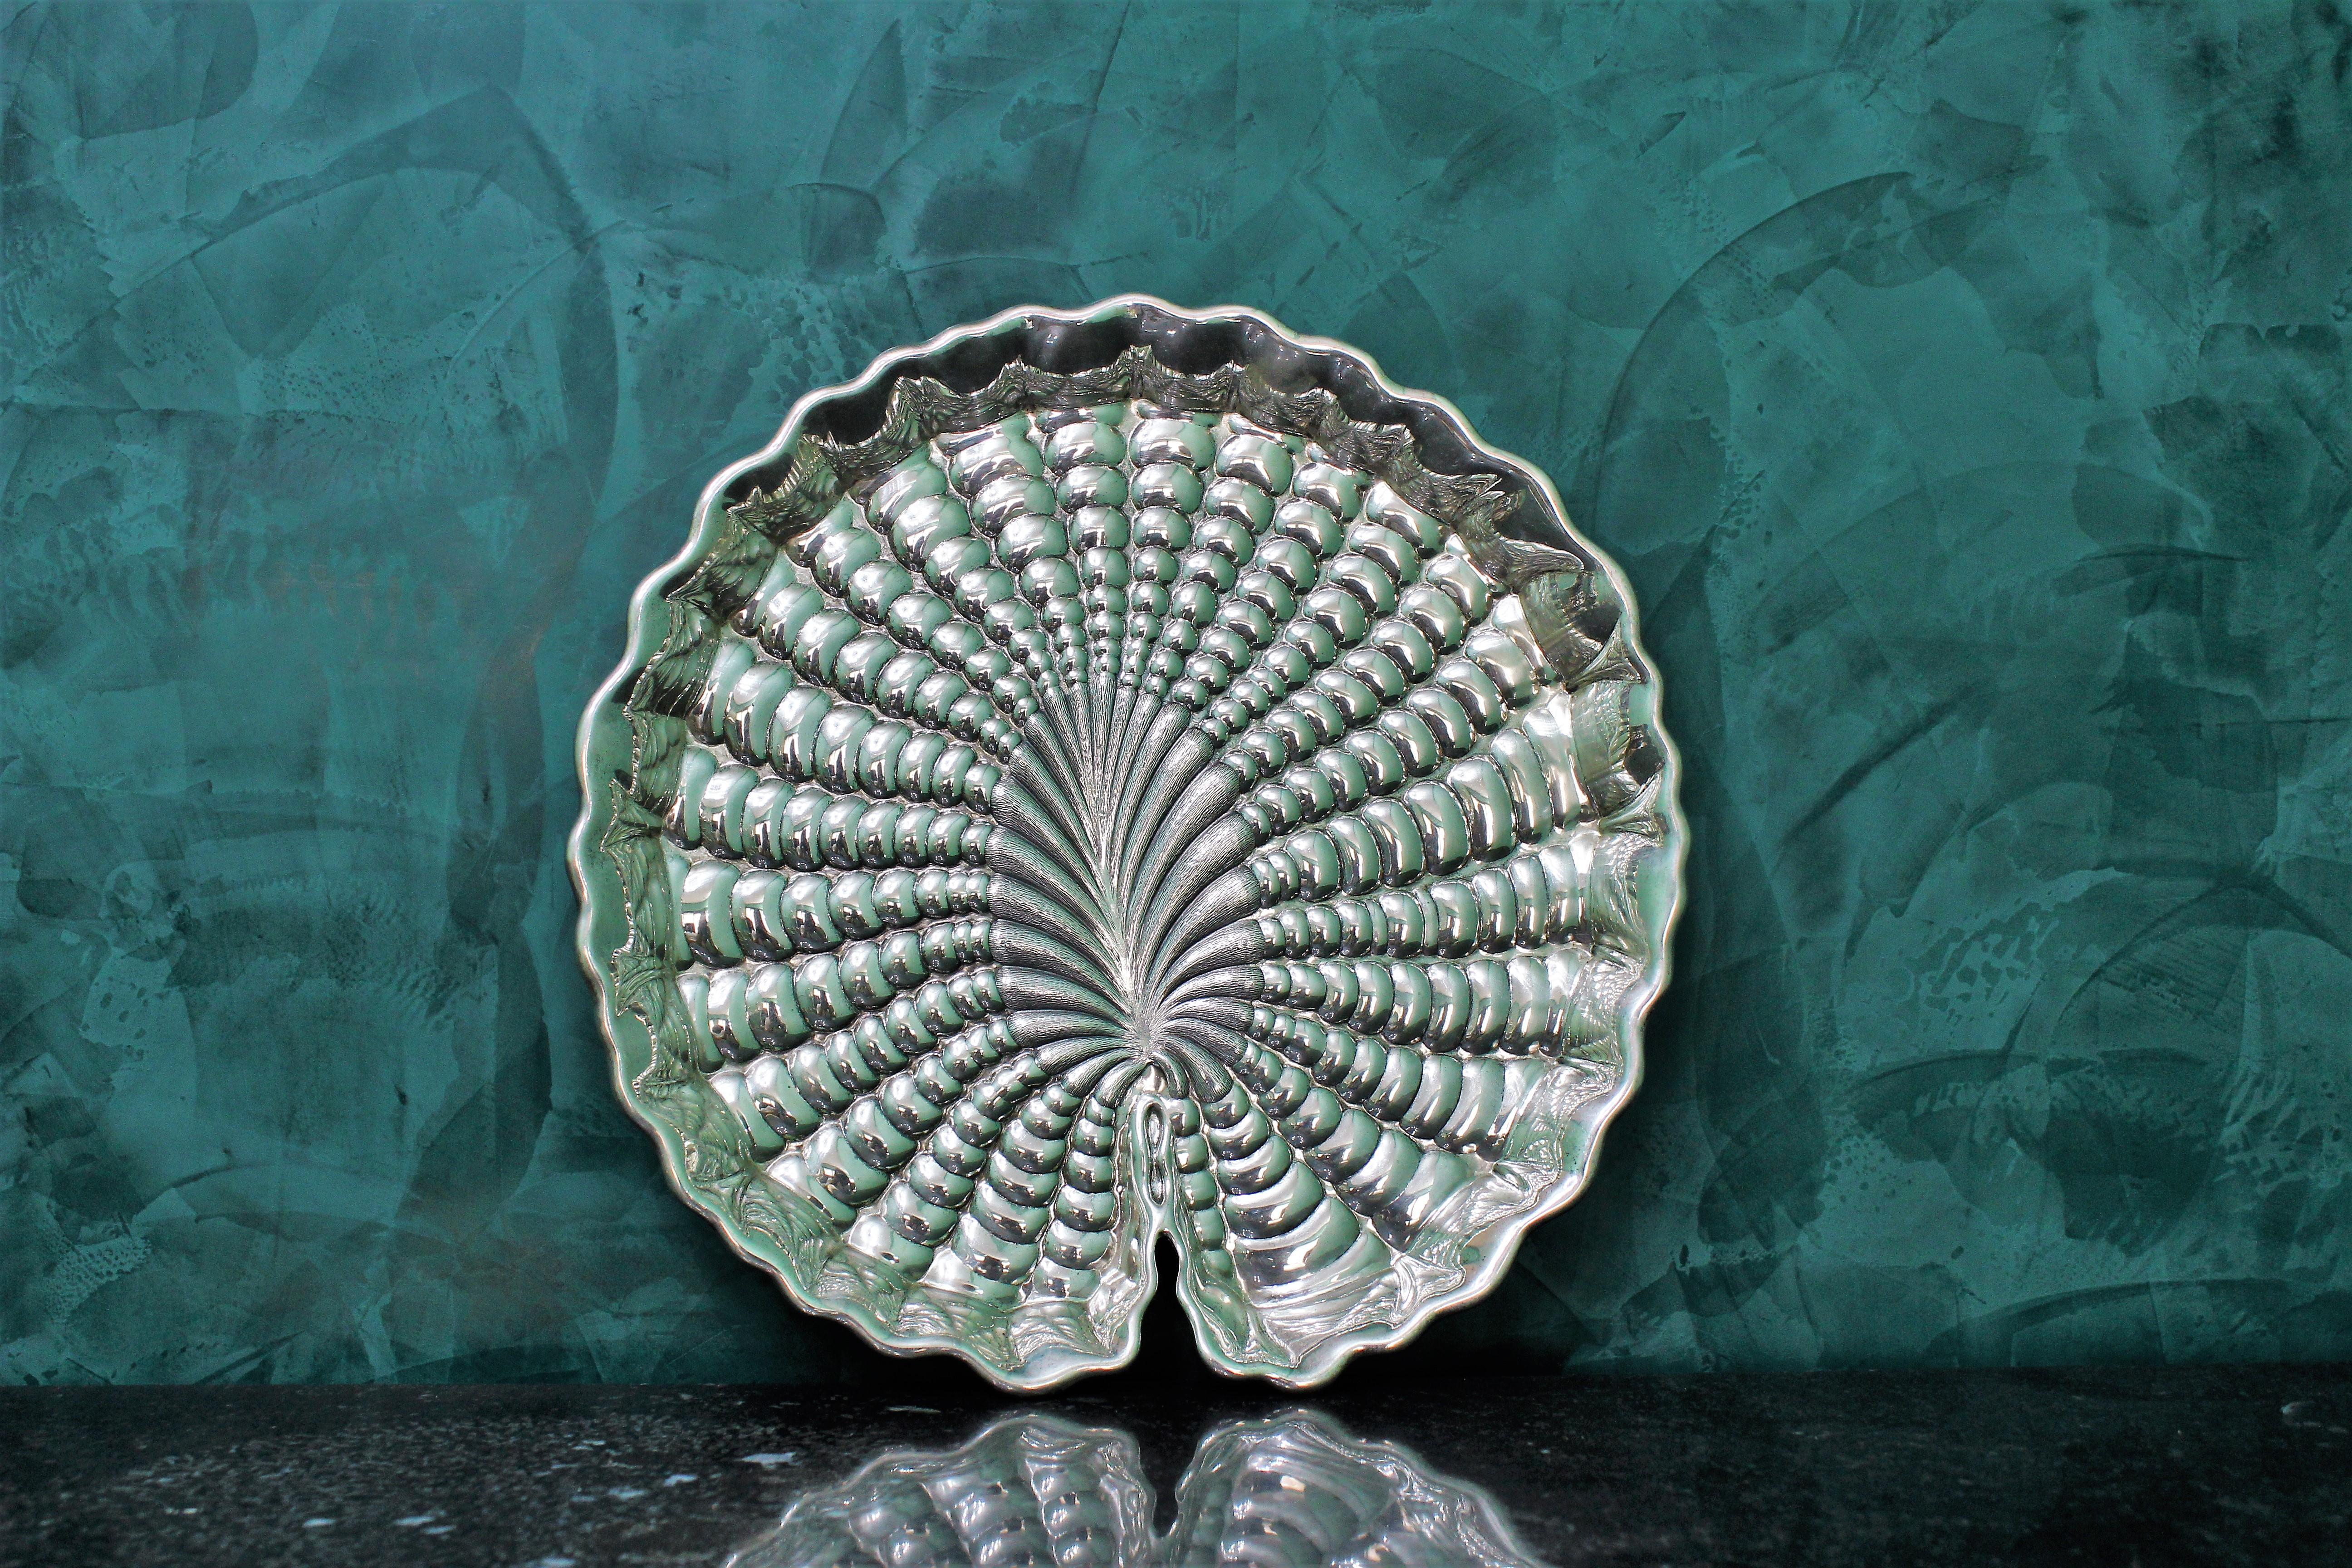 Sterling silver centerpiece nymphaea/water lily leaf embossed and engraved by hand with a magnificent work.
Can be used as an elegant and precious centerpiece the way it is or used as a serving plate.
Signed by Gianmaria Buccellati - Milan and